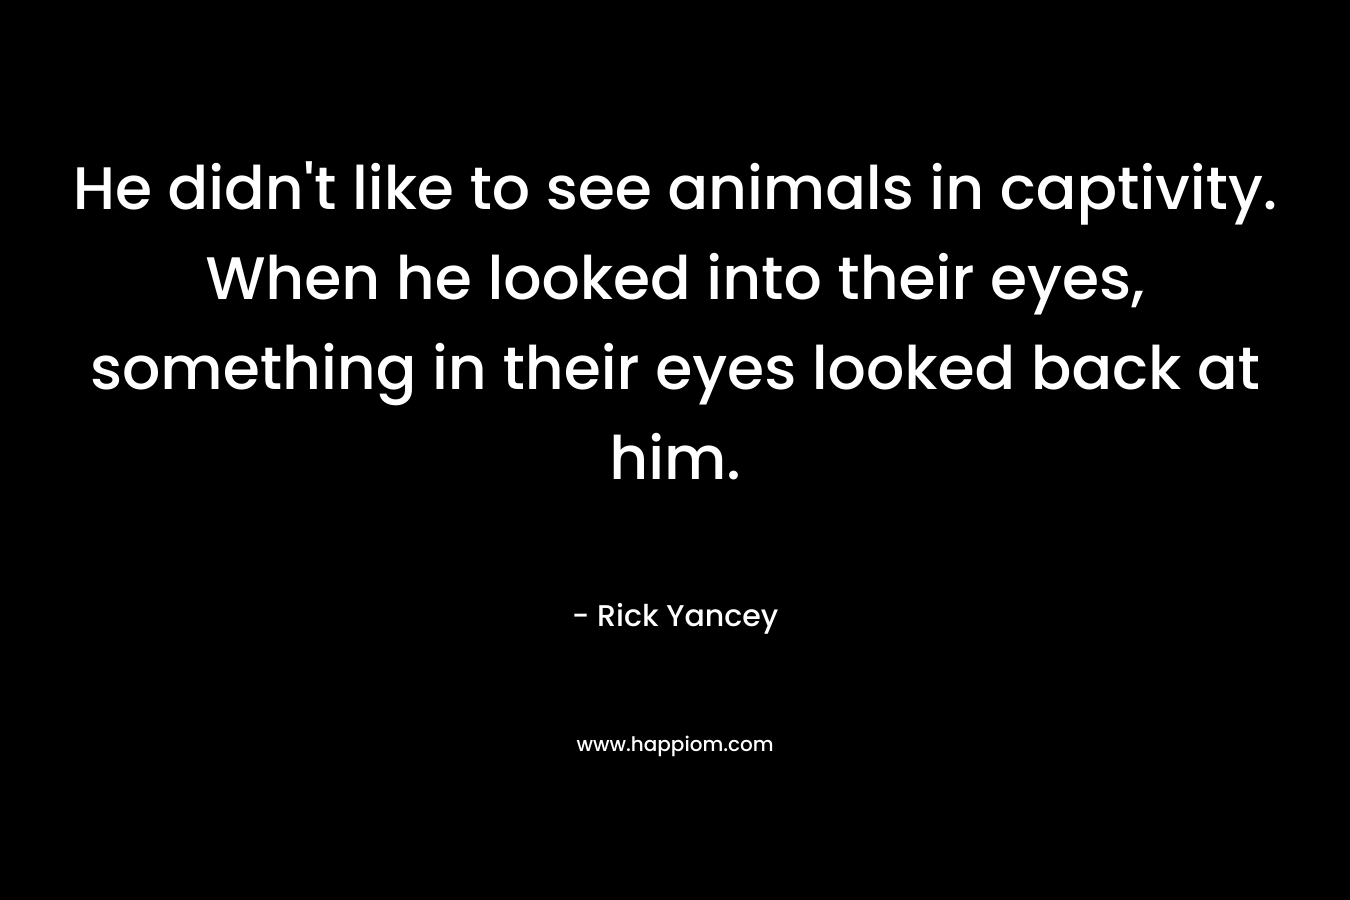 He didn’t like to see animals in captivity. When he looked into their eyes, something in their eyes looked back at him. – Rick Yancey